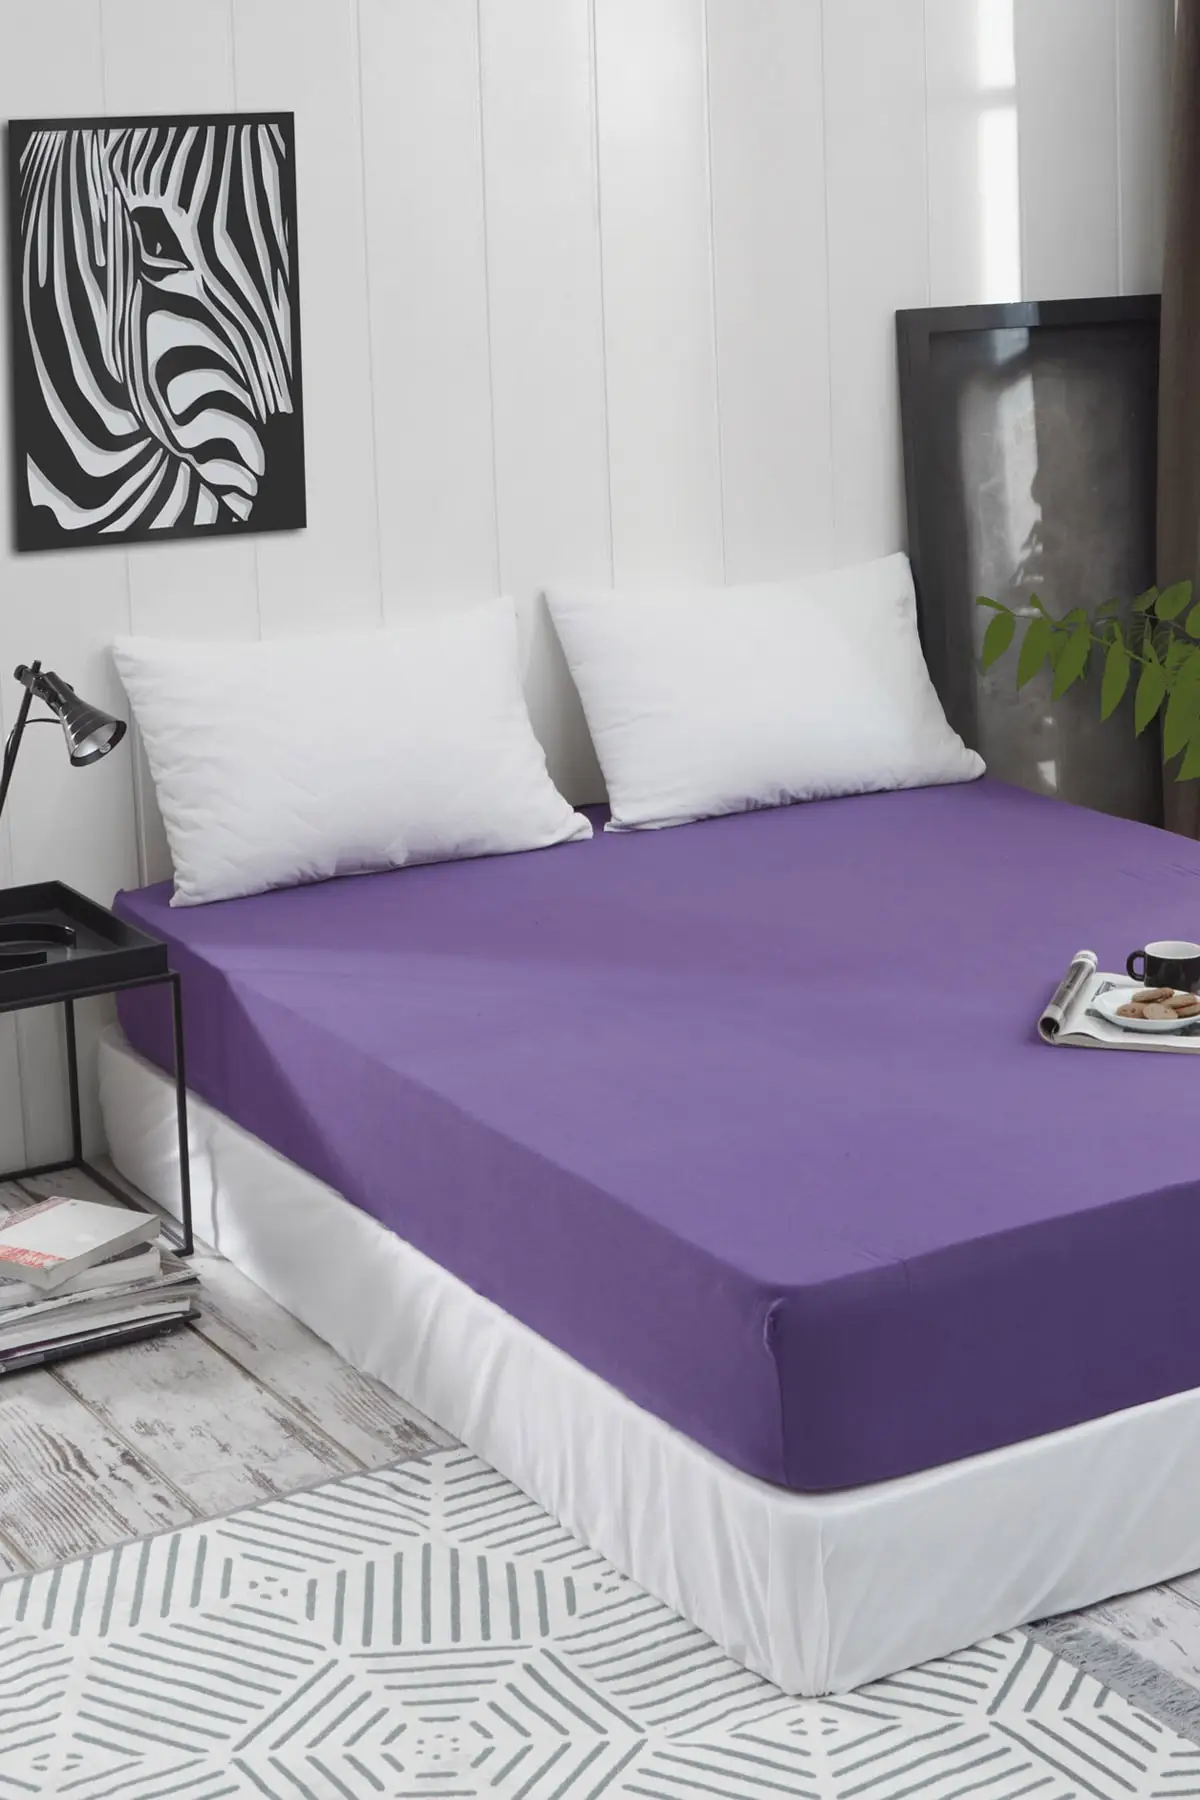 

Pure %100 Cotton Combing Luxury Solid Purple Fitted Sheet Elastic Bed Linens Mattress Cover 160x200 Comfortable Modern 2020